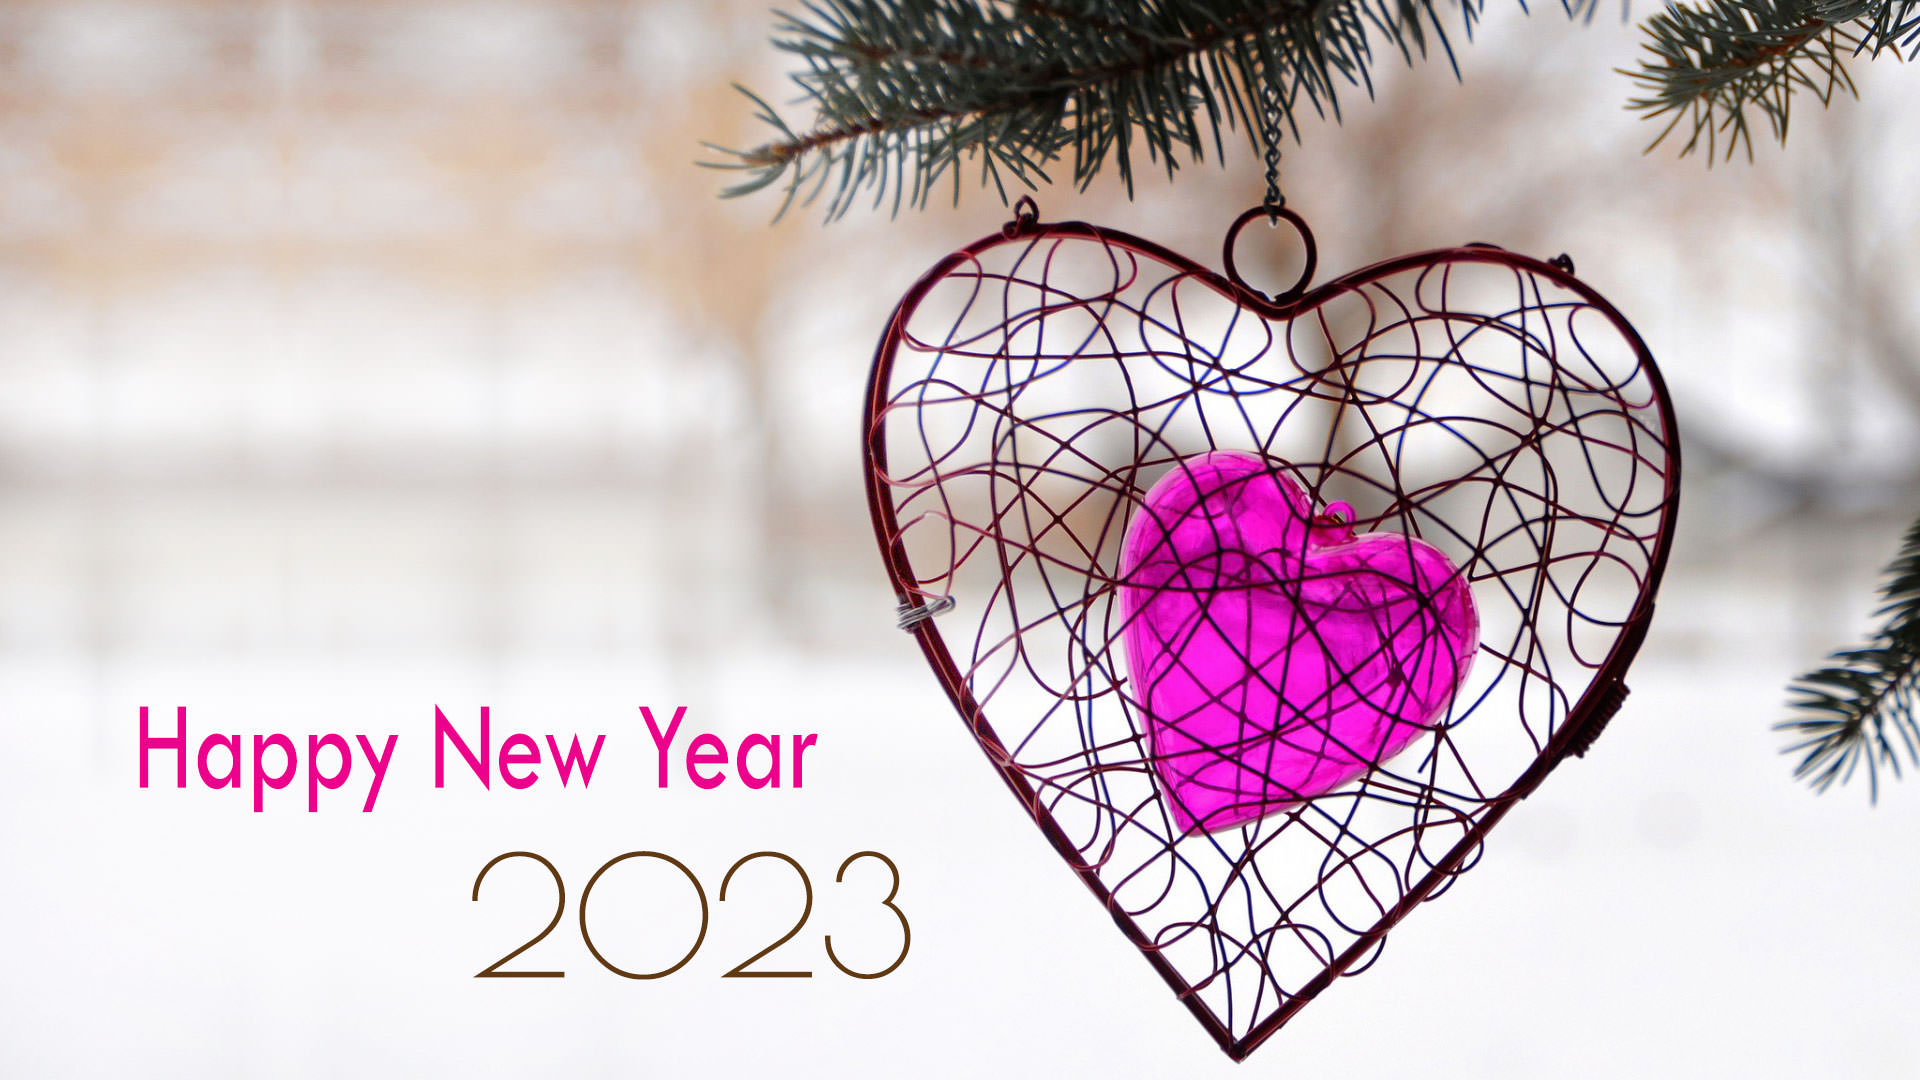 New Year 2023 Wishes Wallpapers for Lover